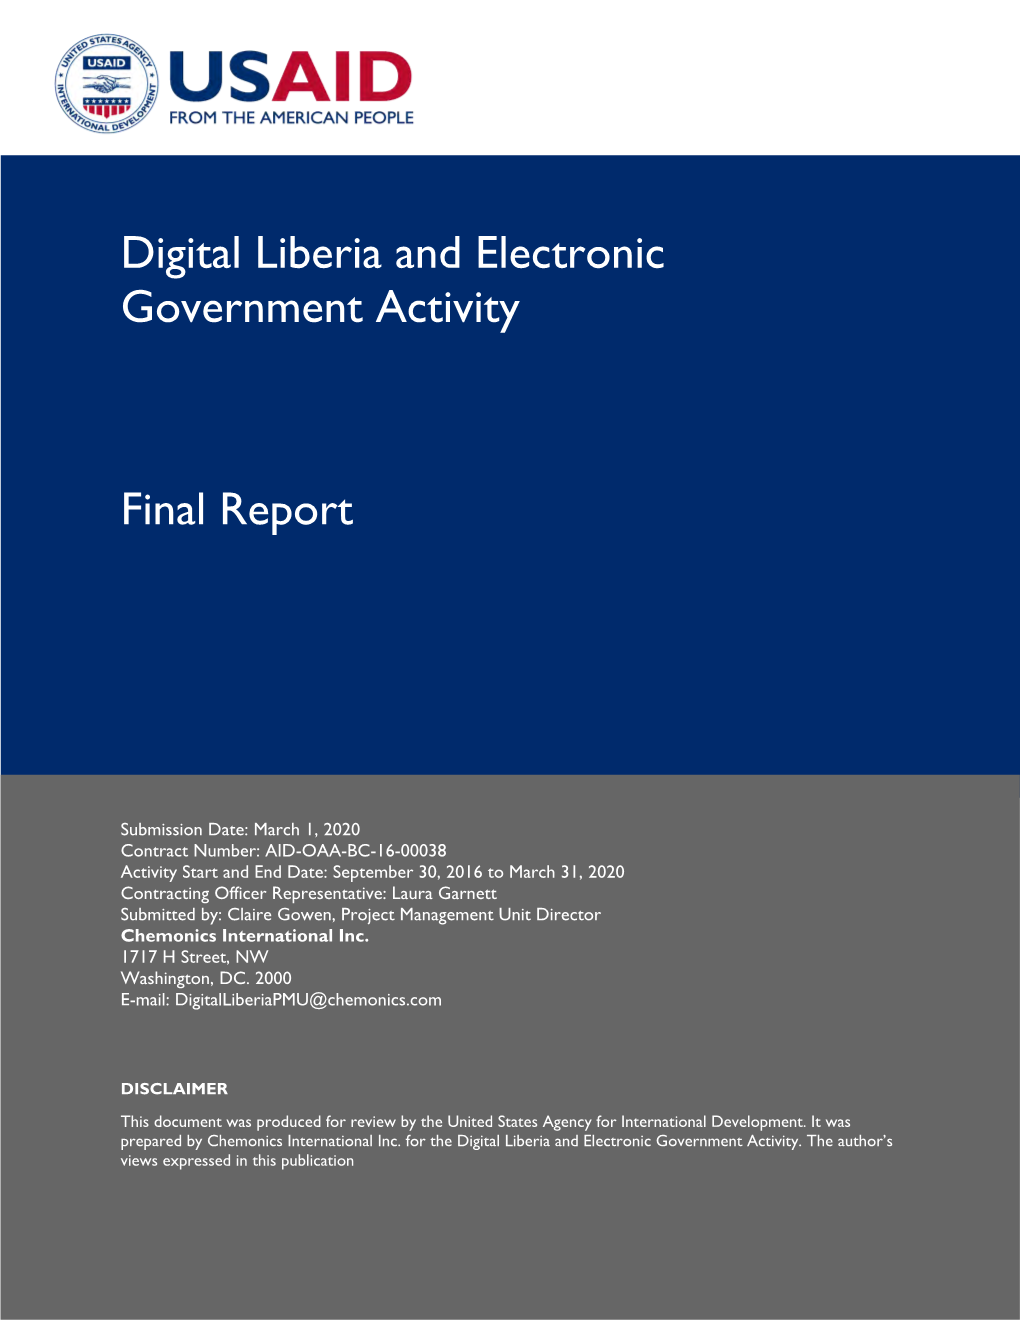 Digital Liberia and Electronic Government Activity